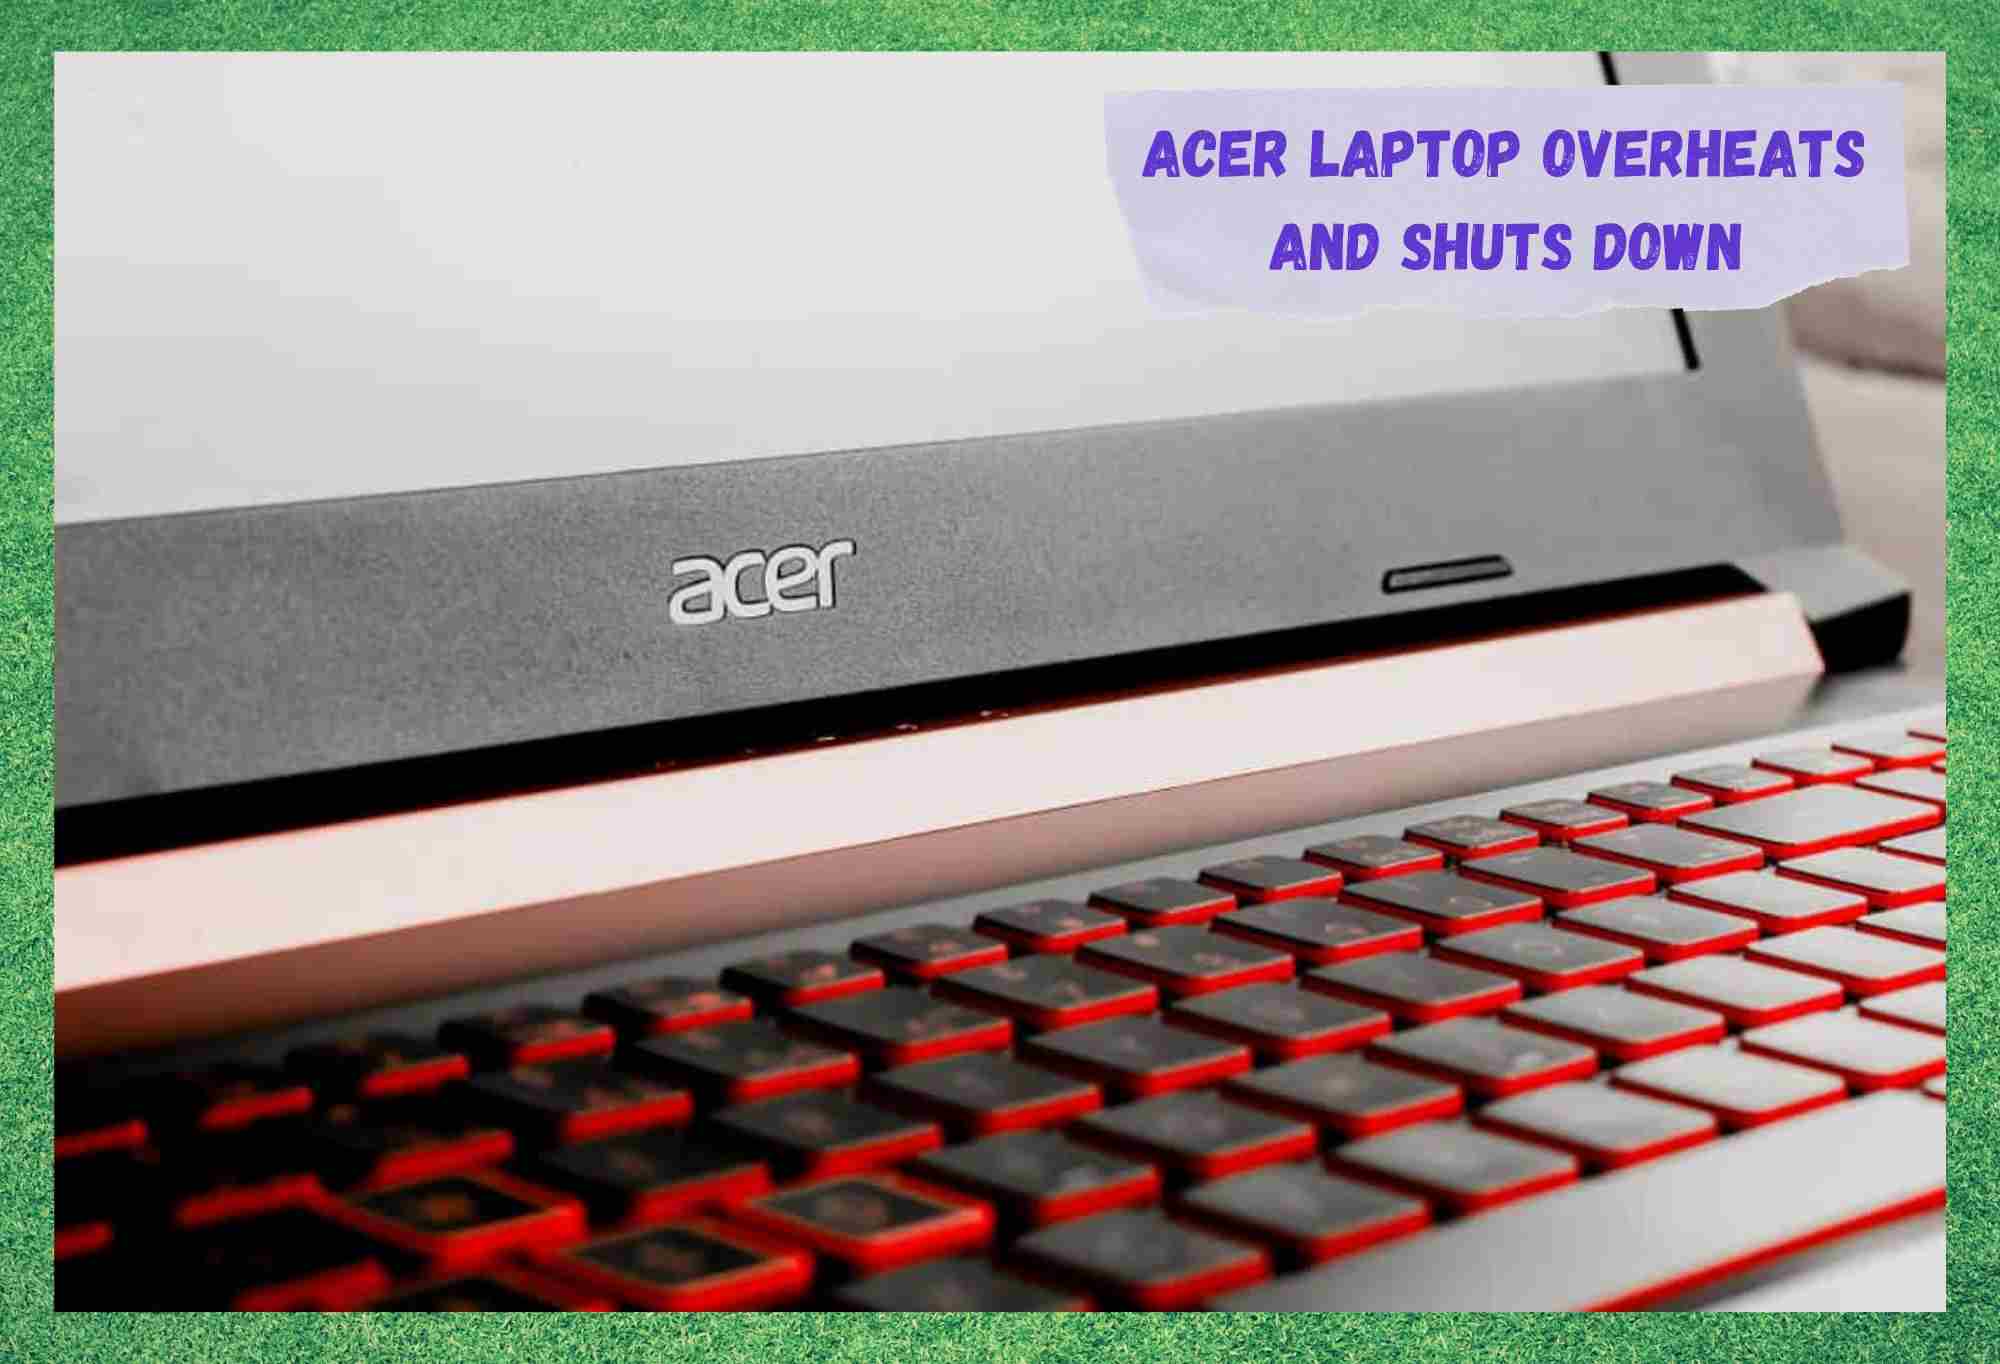 acer laptop overheats and shuts down